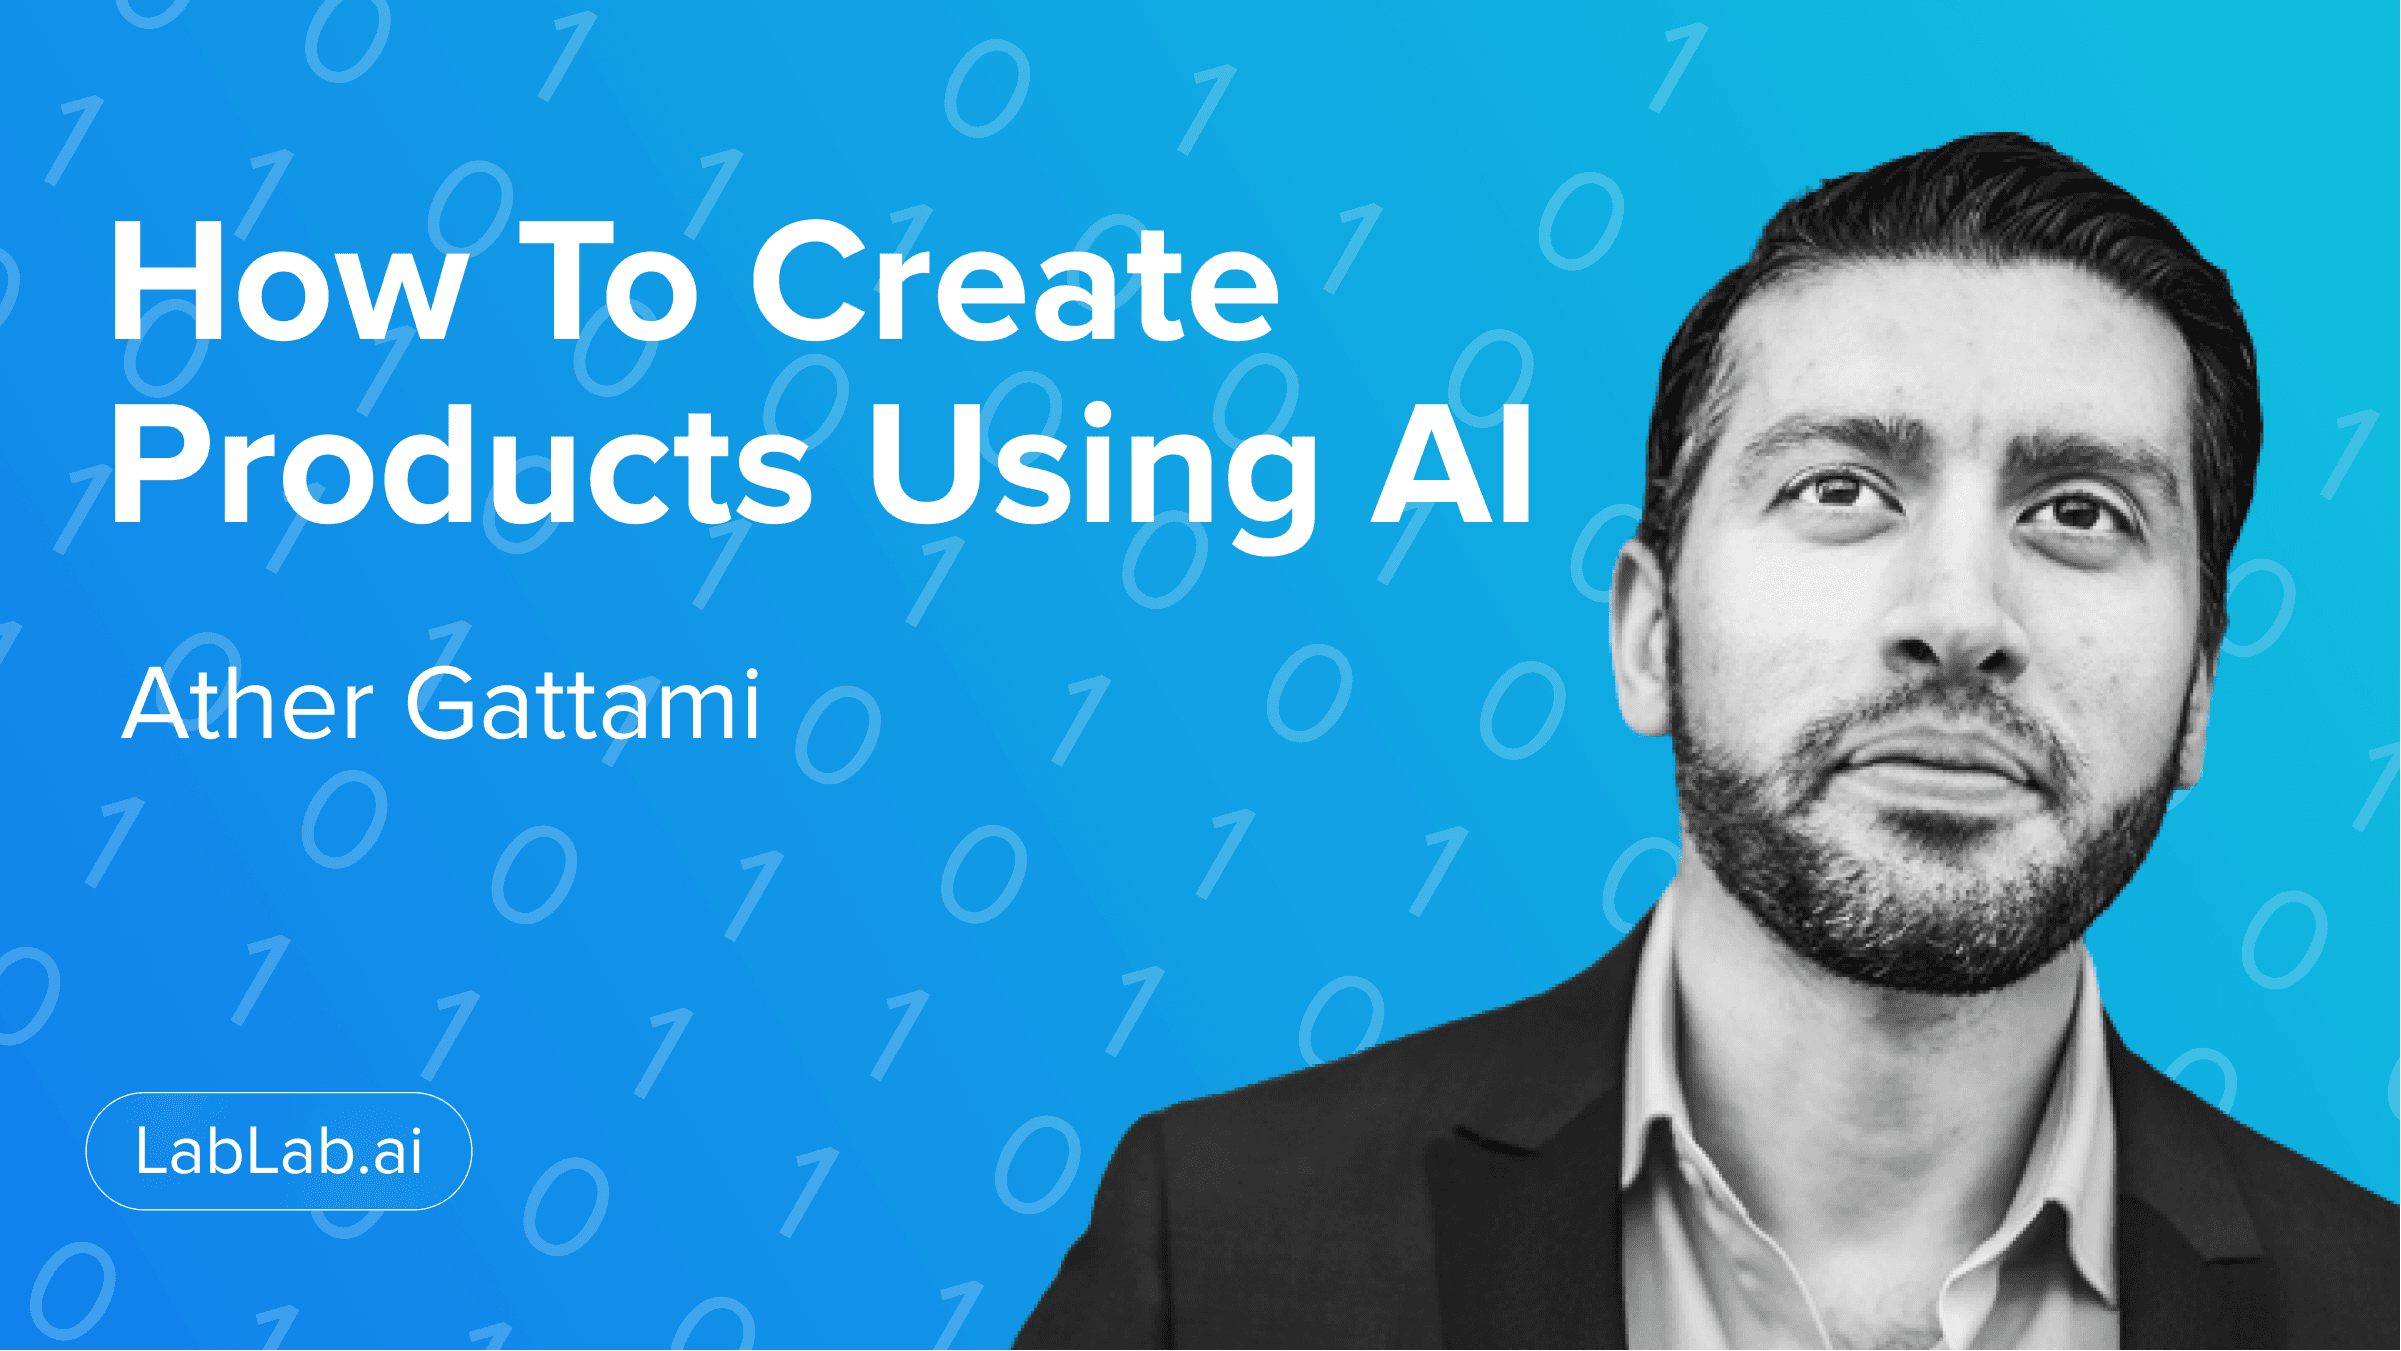 Ather Gattami: How to Create Products Using AI event thumbnail